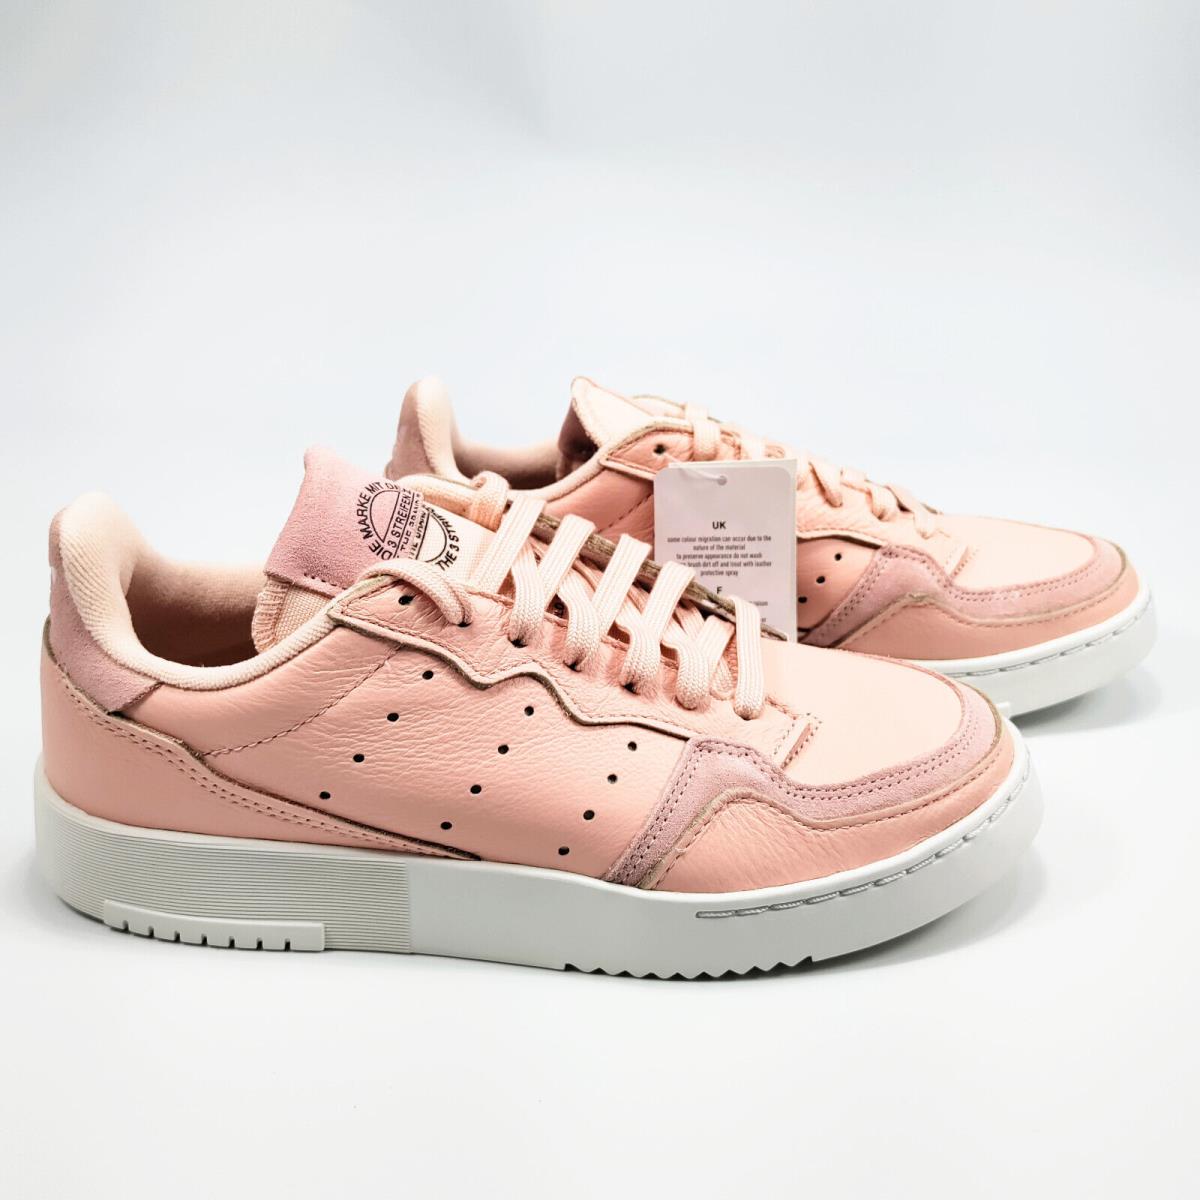 Adidas shoes Revolution Racer - Pink 4